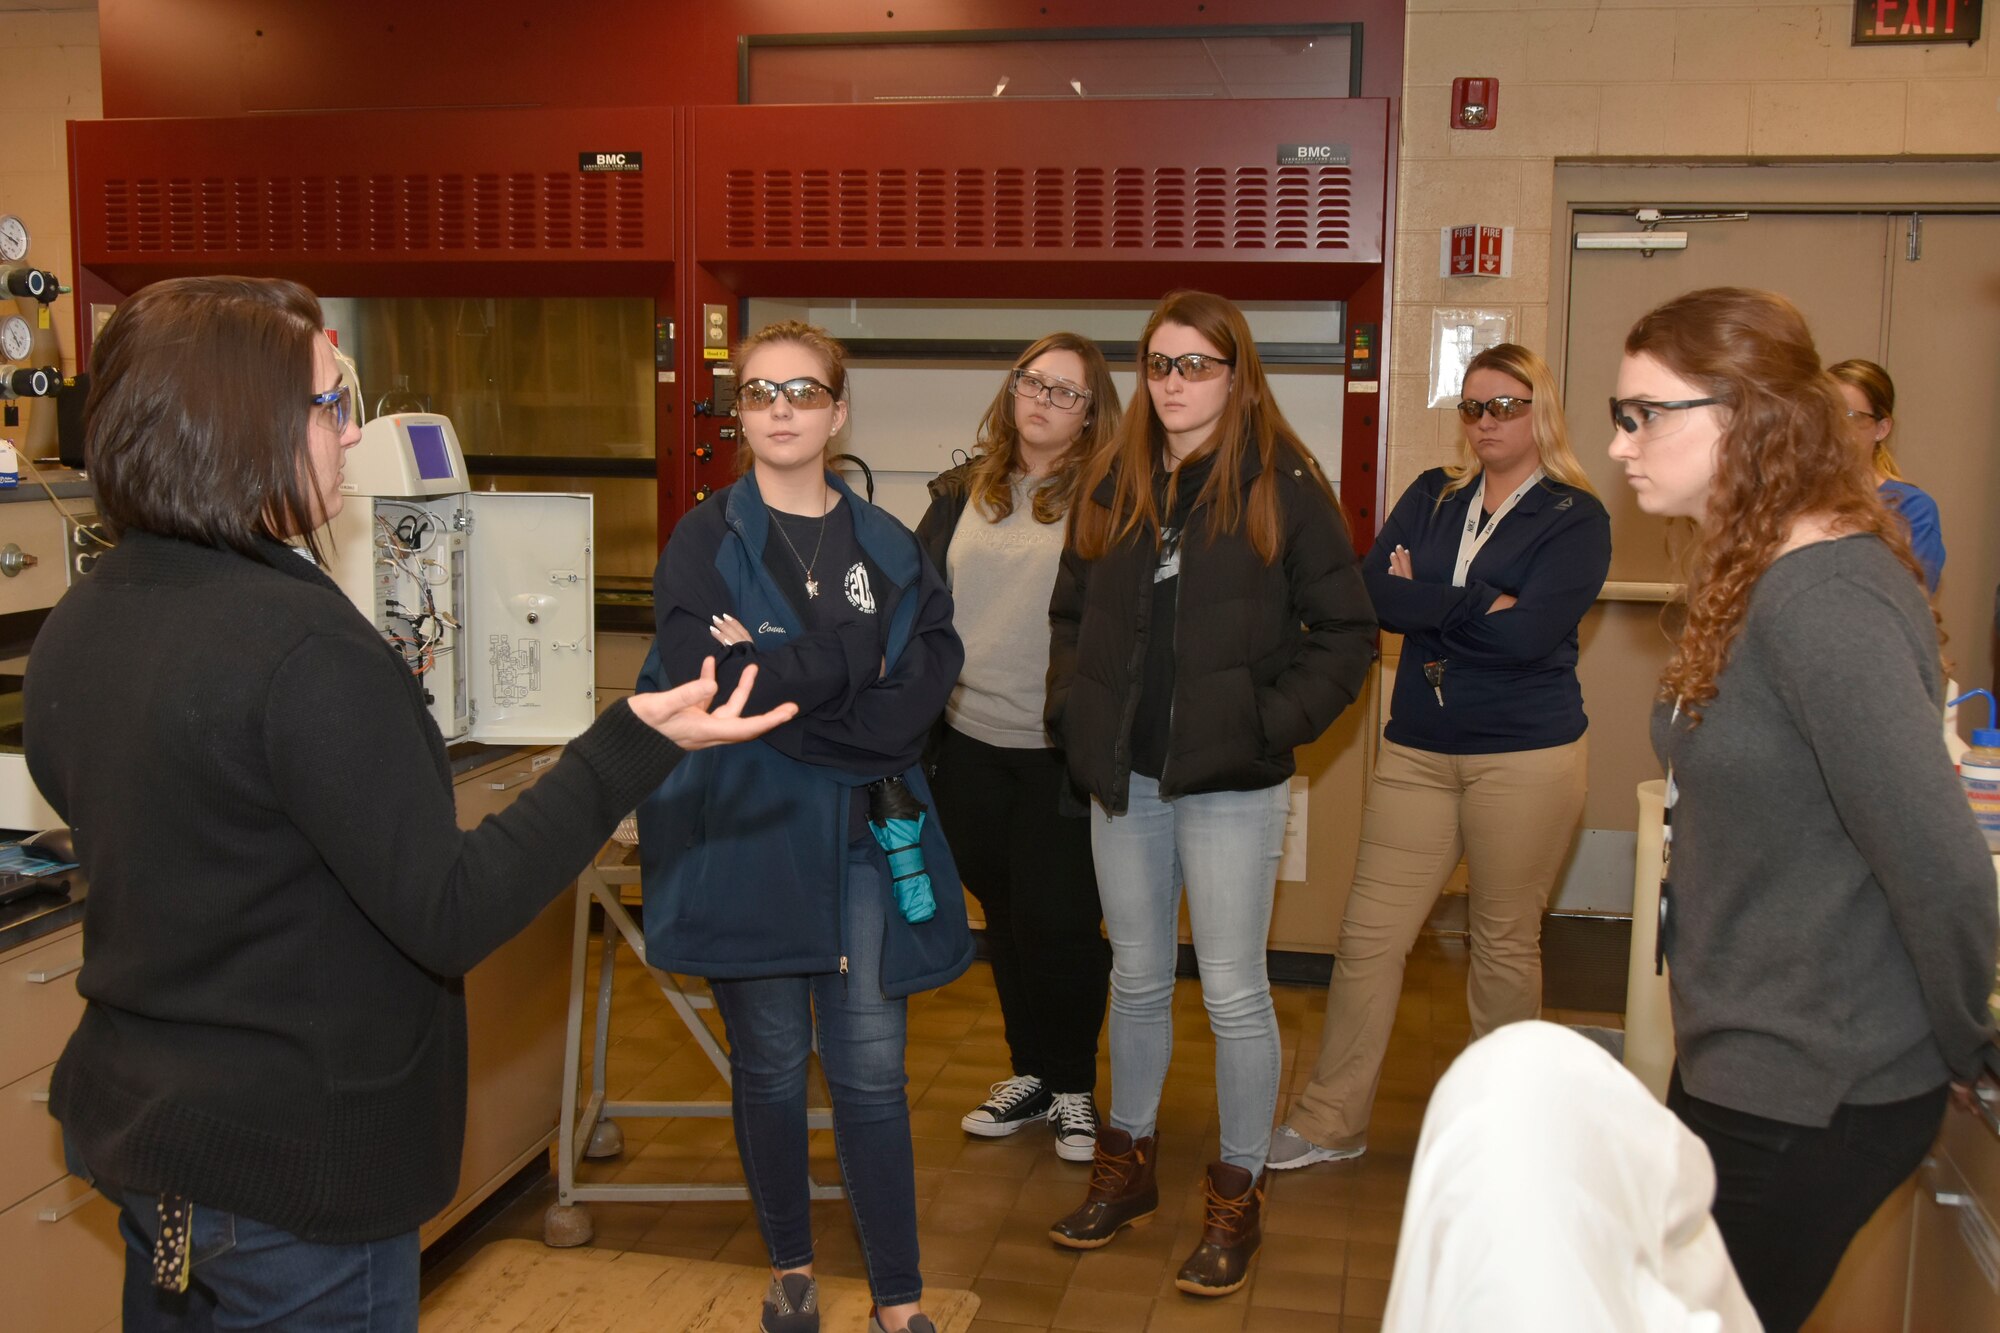 Lena Elenchin, a chemical analyst at Arnold Air Force Base, left, and Mary Forde, an engineer and scientist at Arnold, right, discuss their work in the Arnold Chemical and Metallurgical Lab with a group of area high schoolers during the Engineer for a Day event. (U.S. Air Force photo by Bradley Hicks)